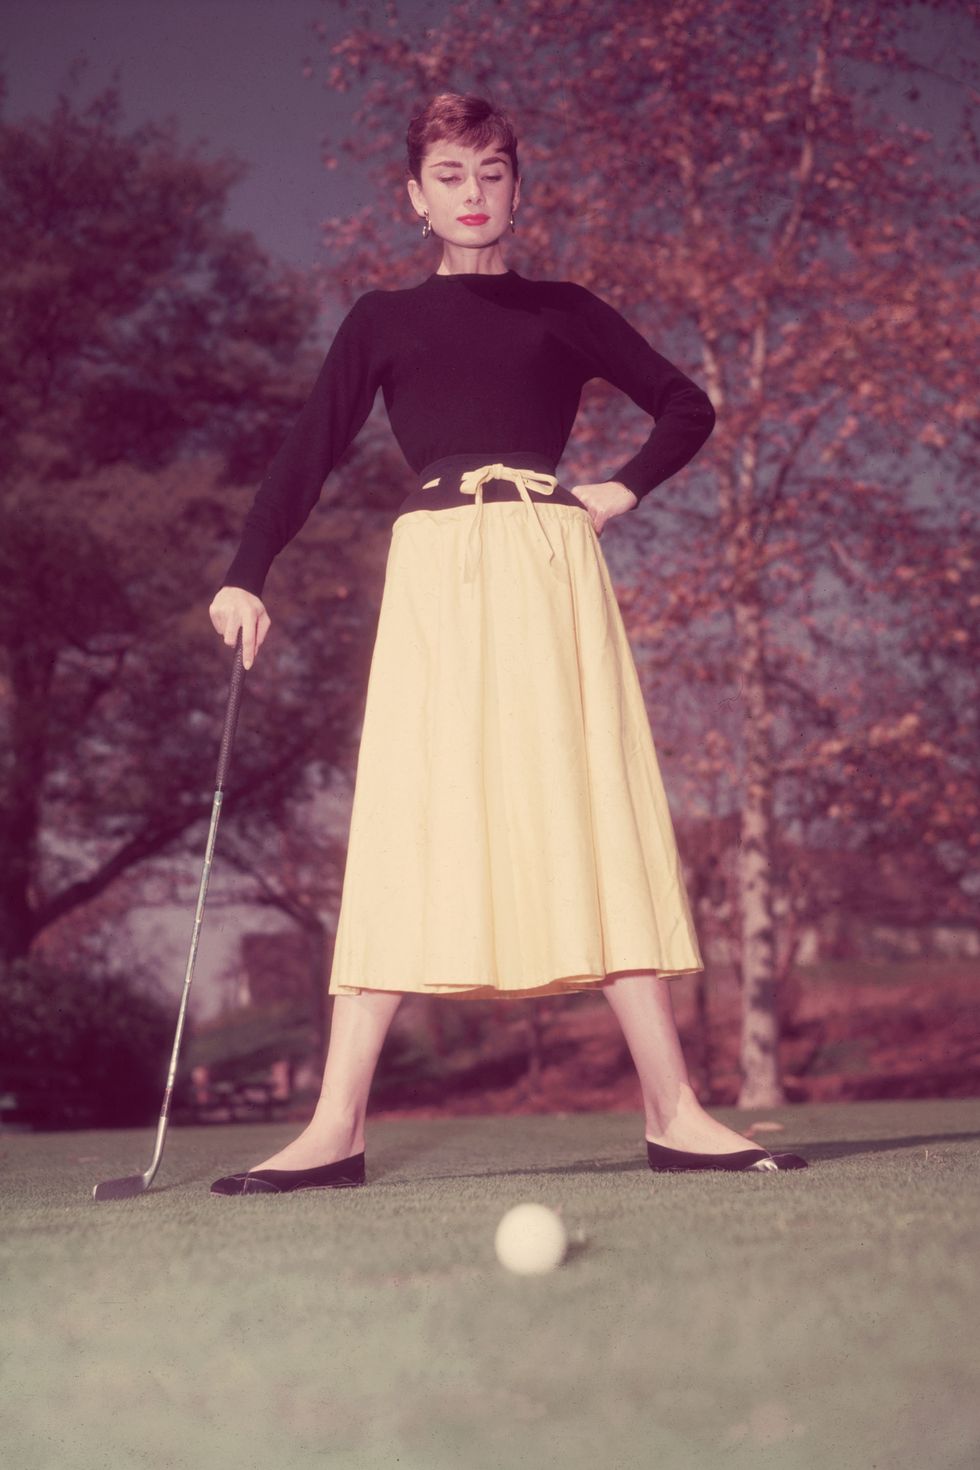 1955:  Full-length view of Belgian-born actor Audrey Hepburn (1929 - 1993) standing on a golf course, holding her putter, with a golf ball on the green in the foreground. She wears a black top and a yellow drawstring skirt.  (Photo by Hulton Archive/Getty Images)